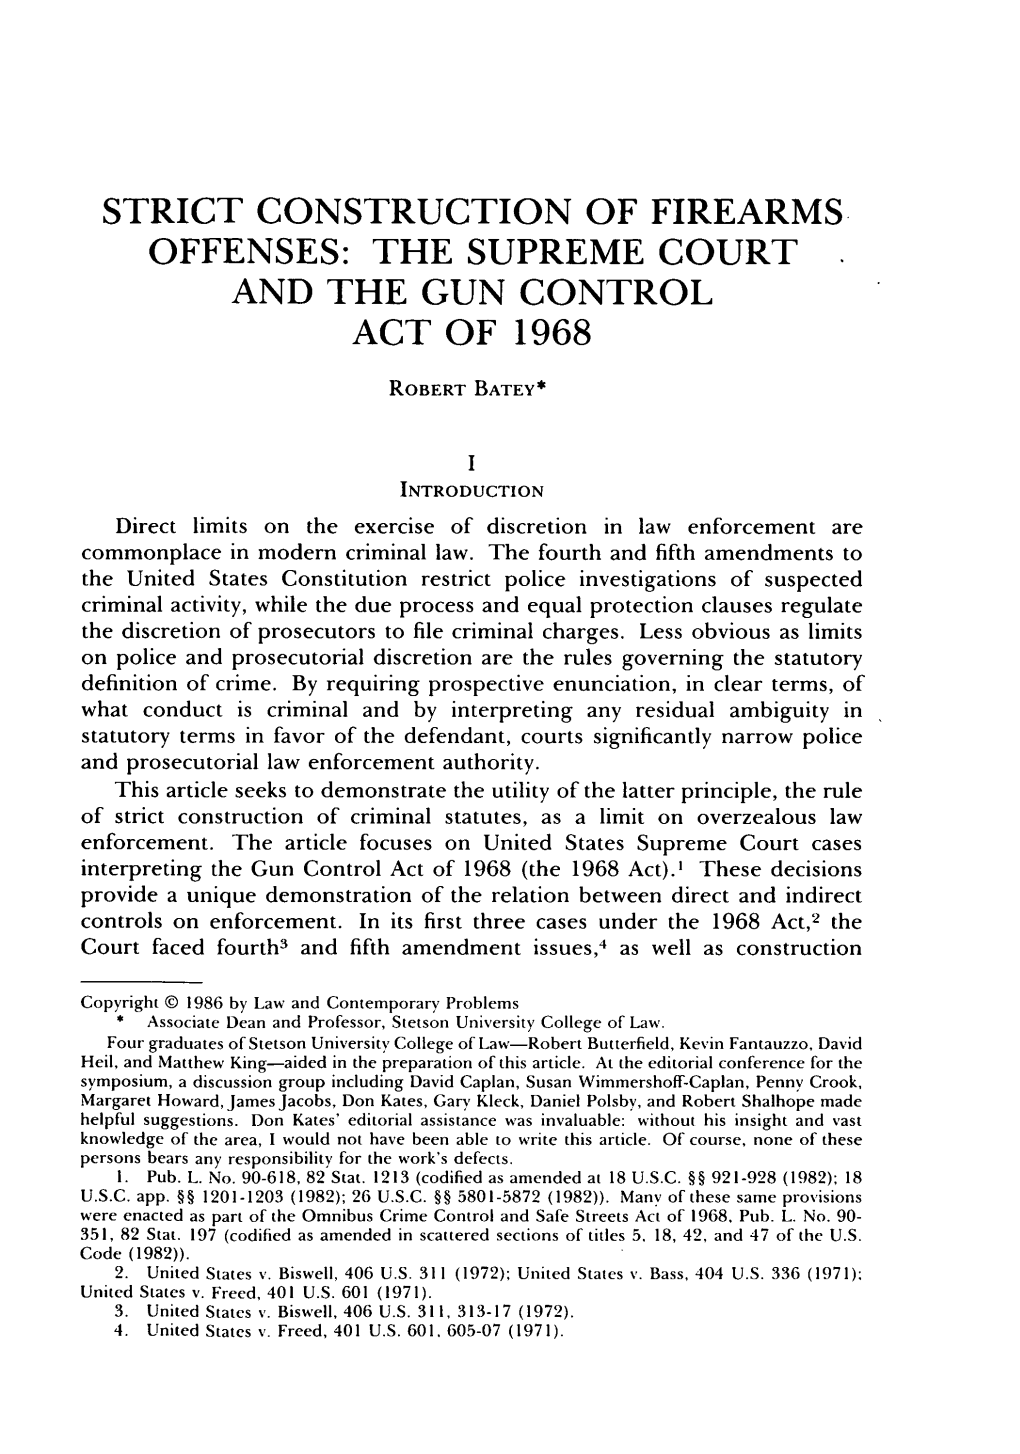 Strict Construction of Firearms Offenses: the Supreme Court and the Gun Control Act of 1968